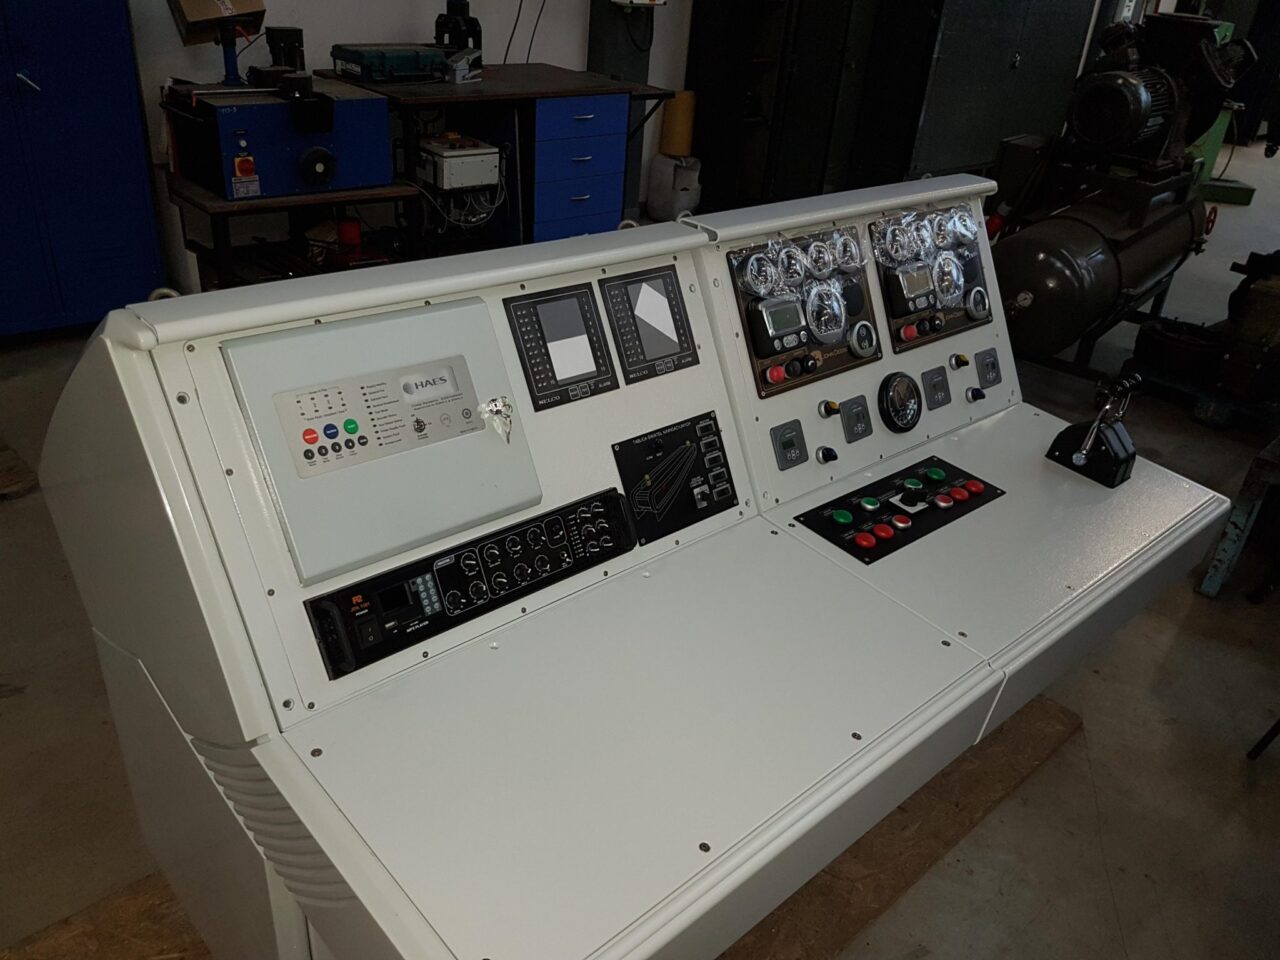 Esento Marine approved Fire Control Panel shipping